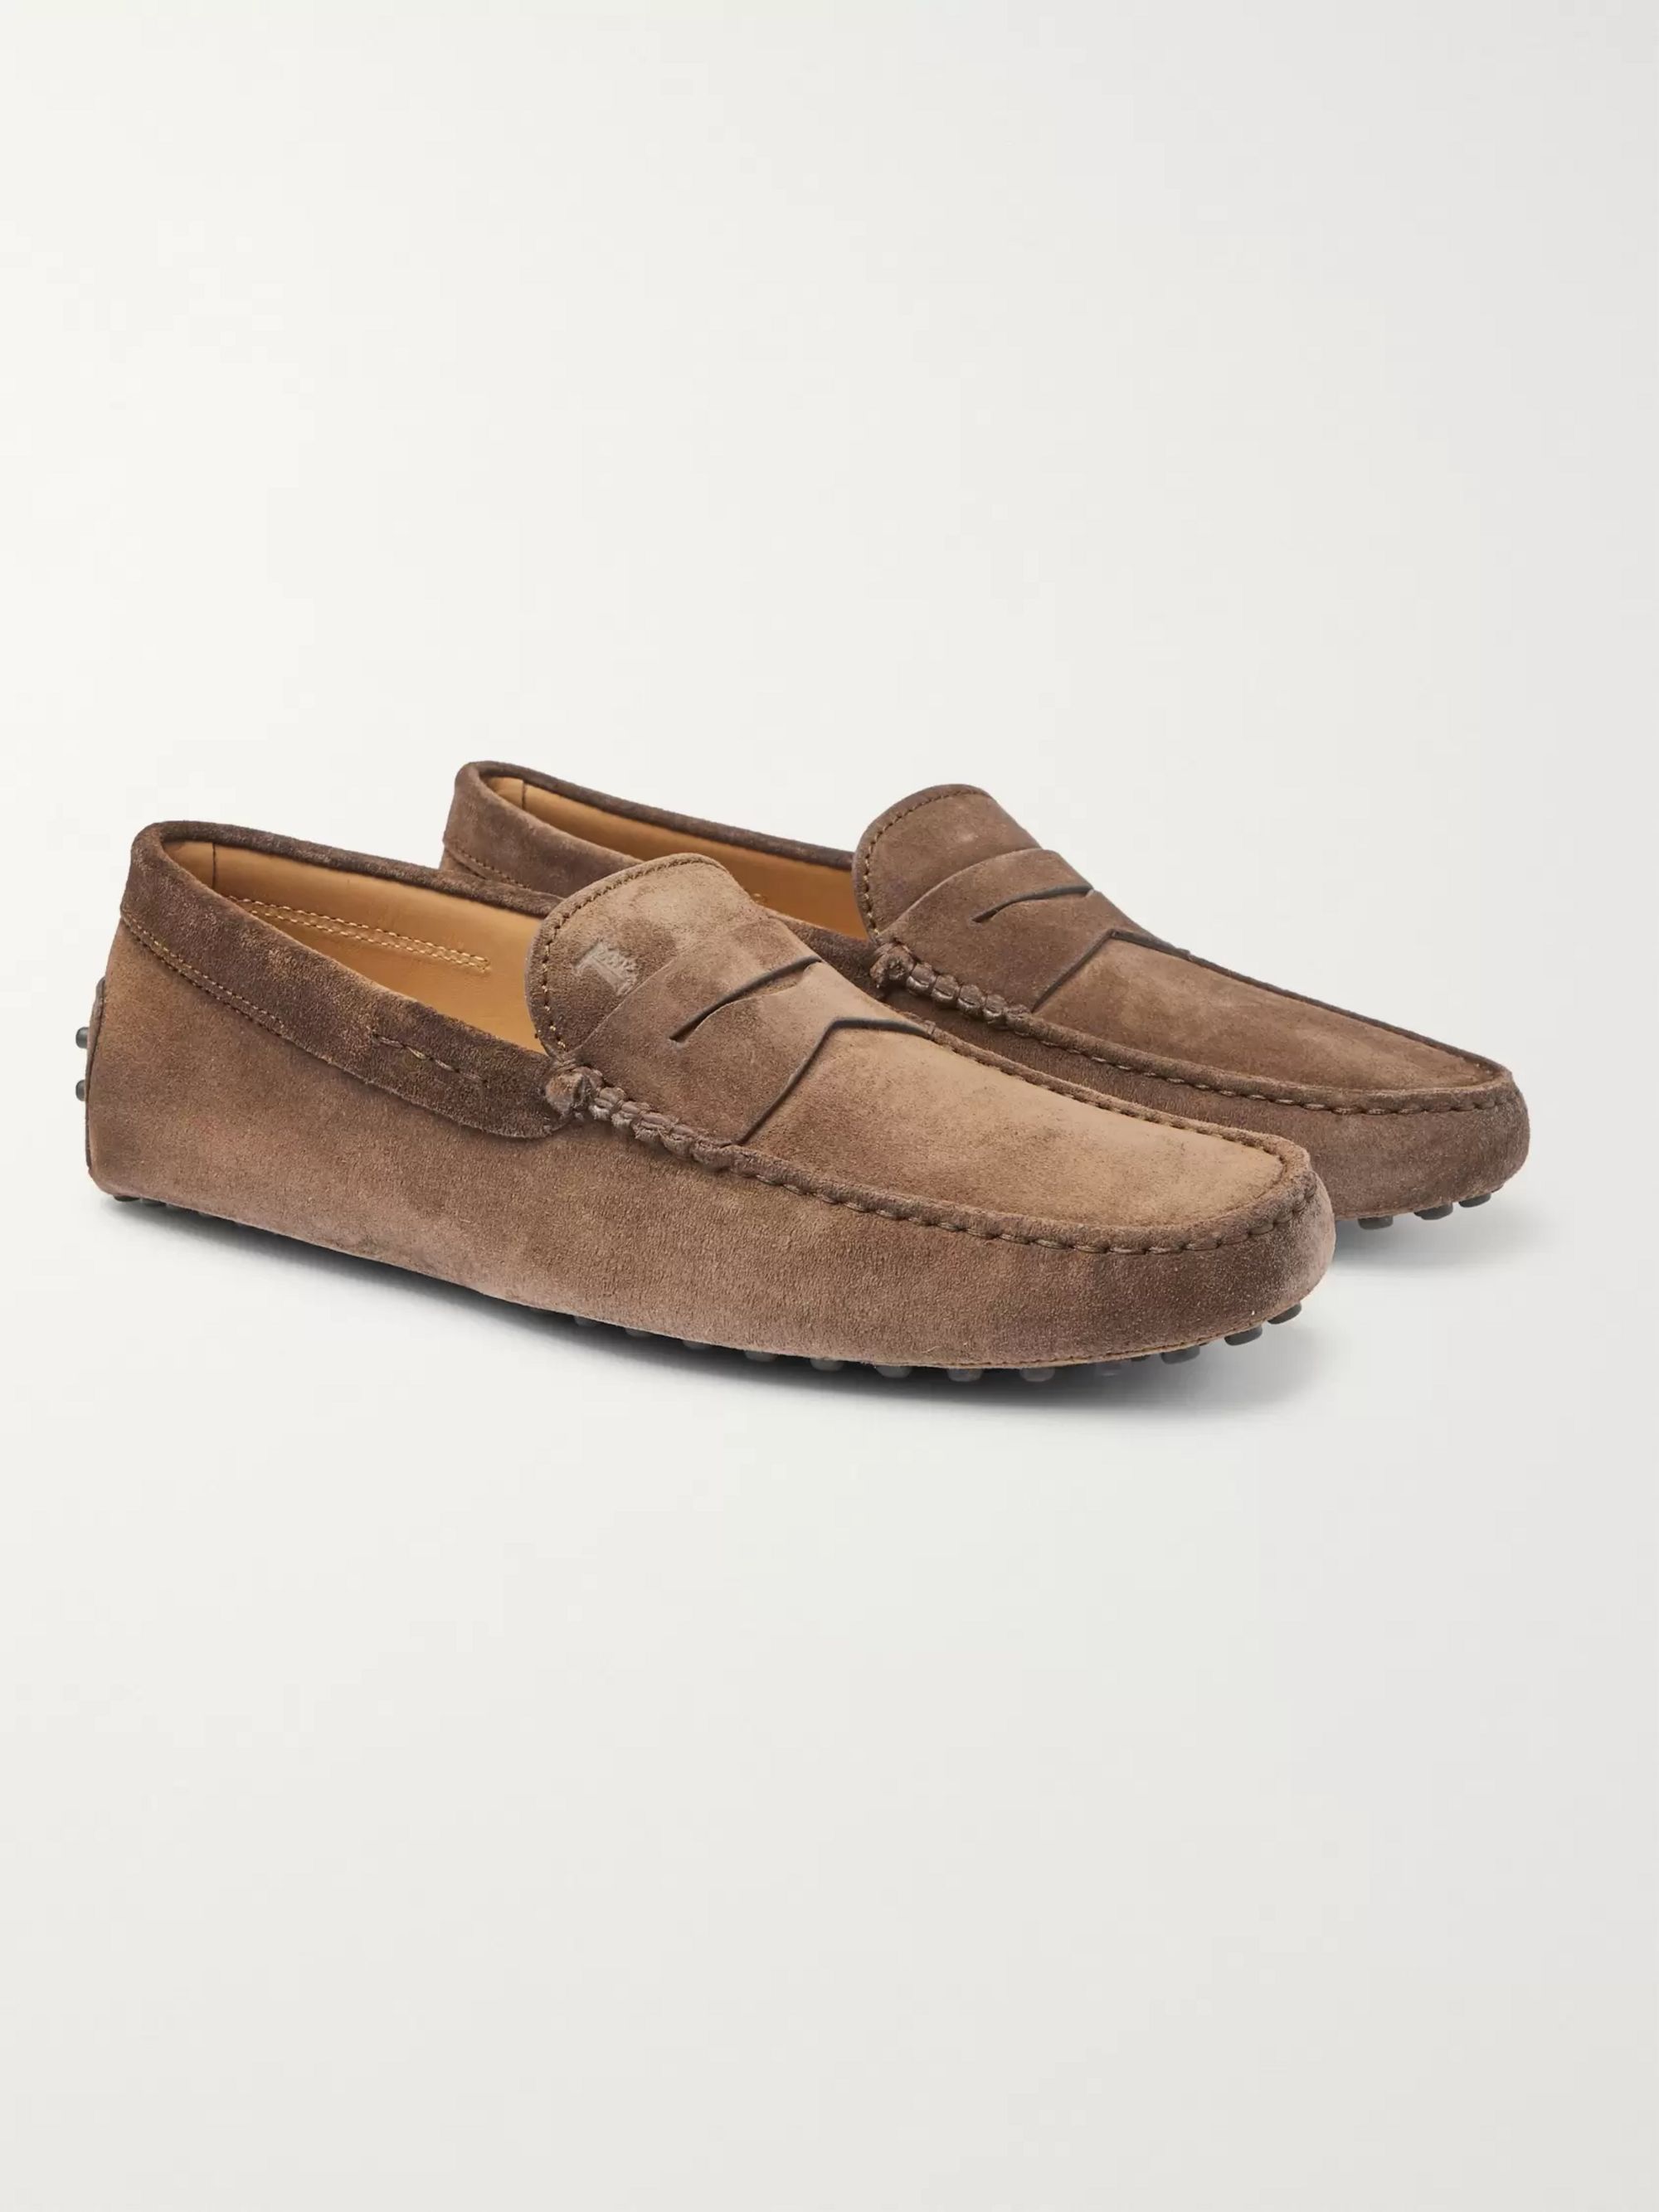 tan suede driving shoes